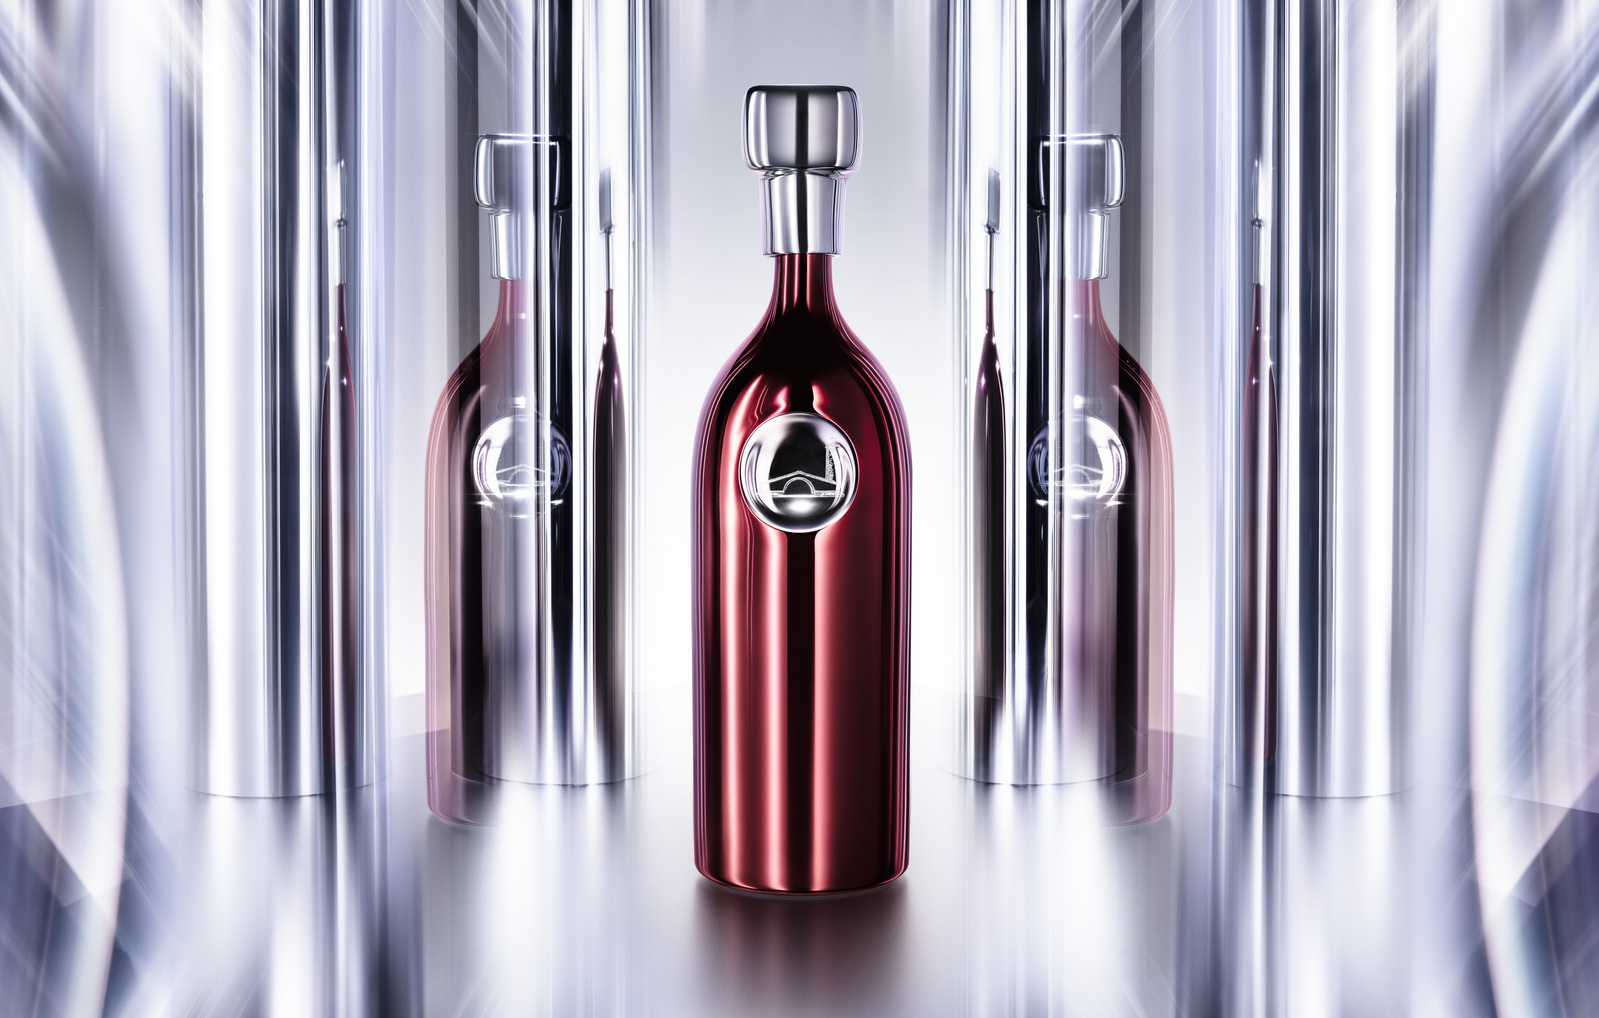 Wine bottle photography by Timothy Hogan in Los Angeles for Robert Mondavi Winery